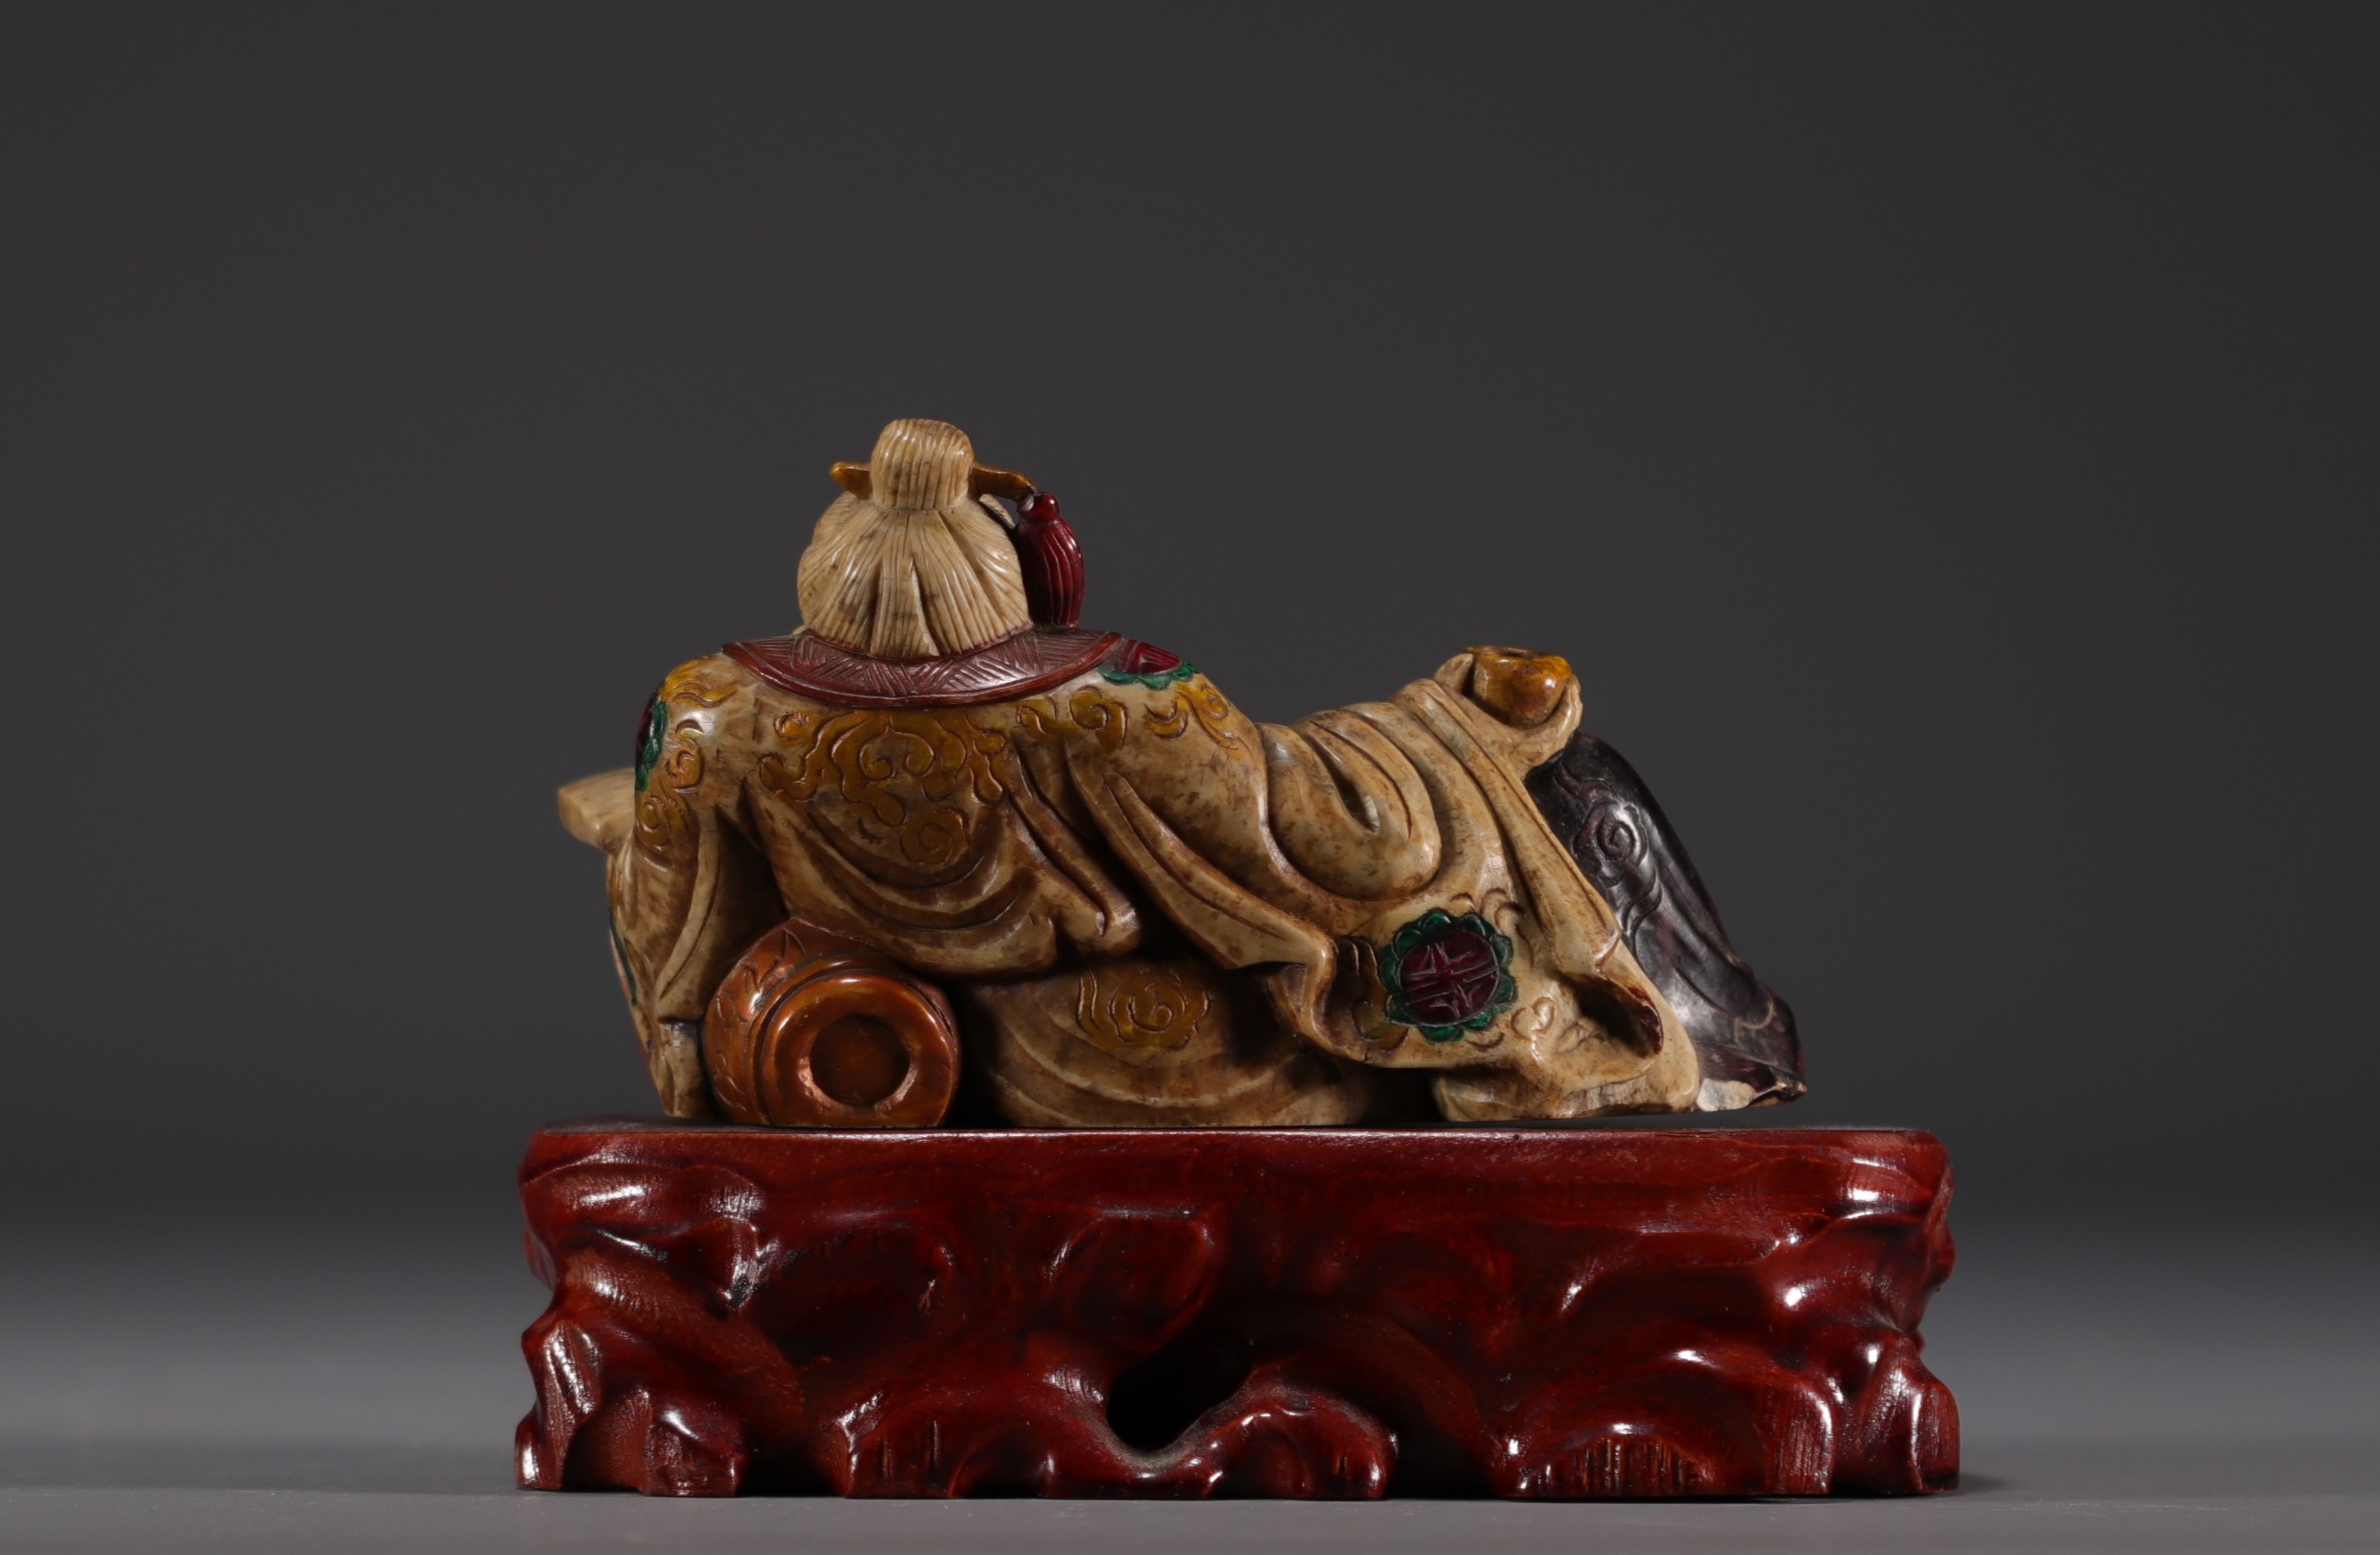 China - Polychrome stone sculpture of a Dignitary on a wooden base. - Image 2 of 4